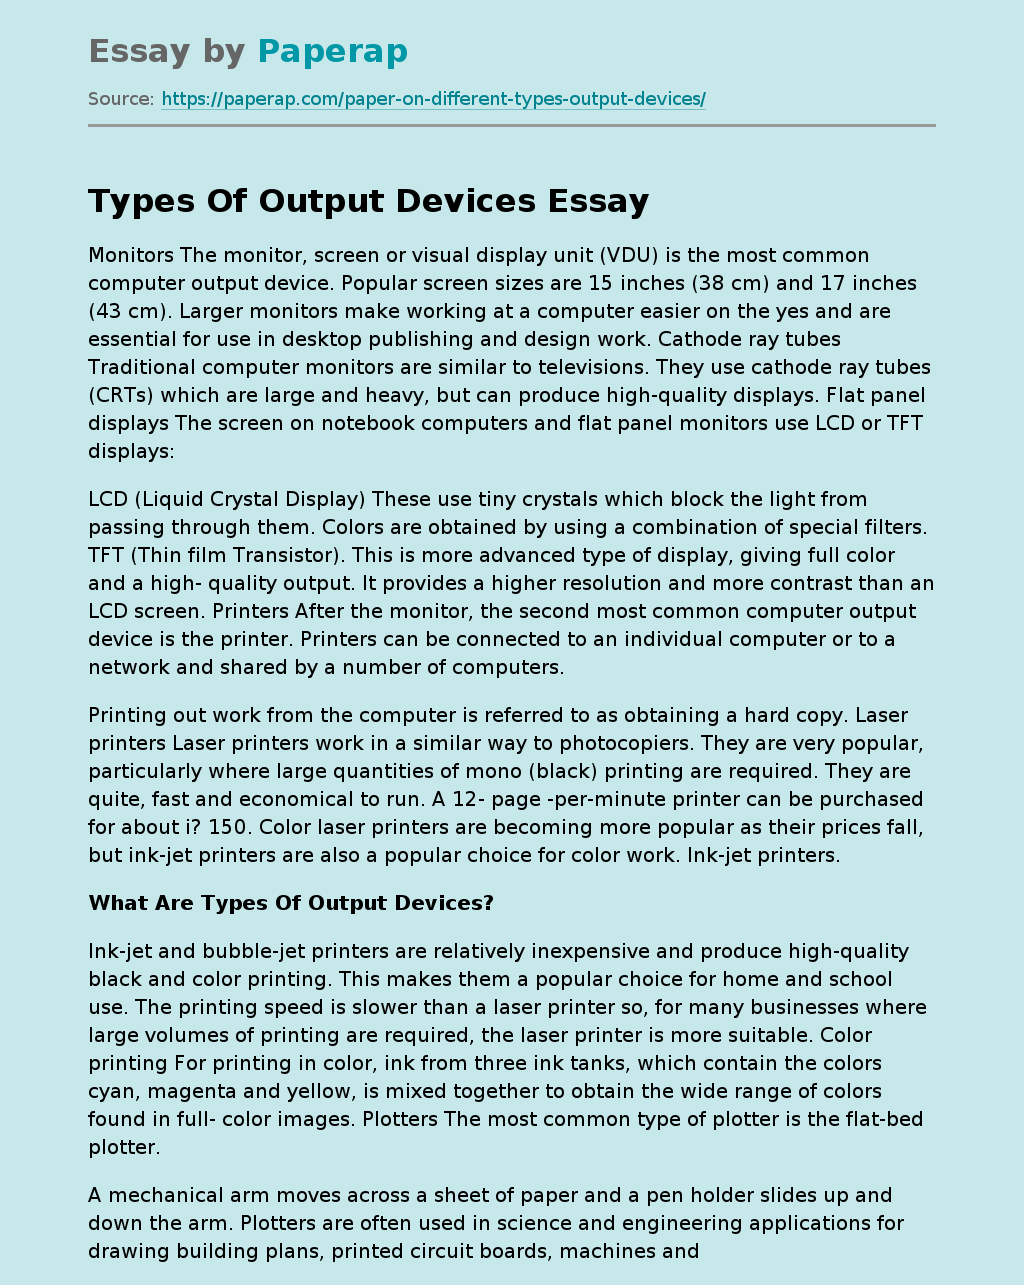 Types Of Output Devices